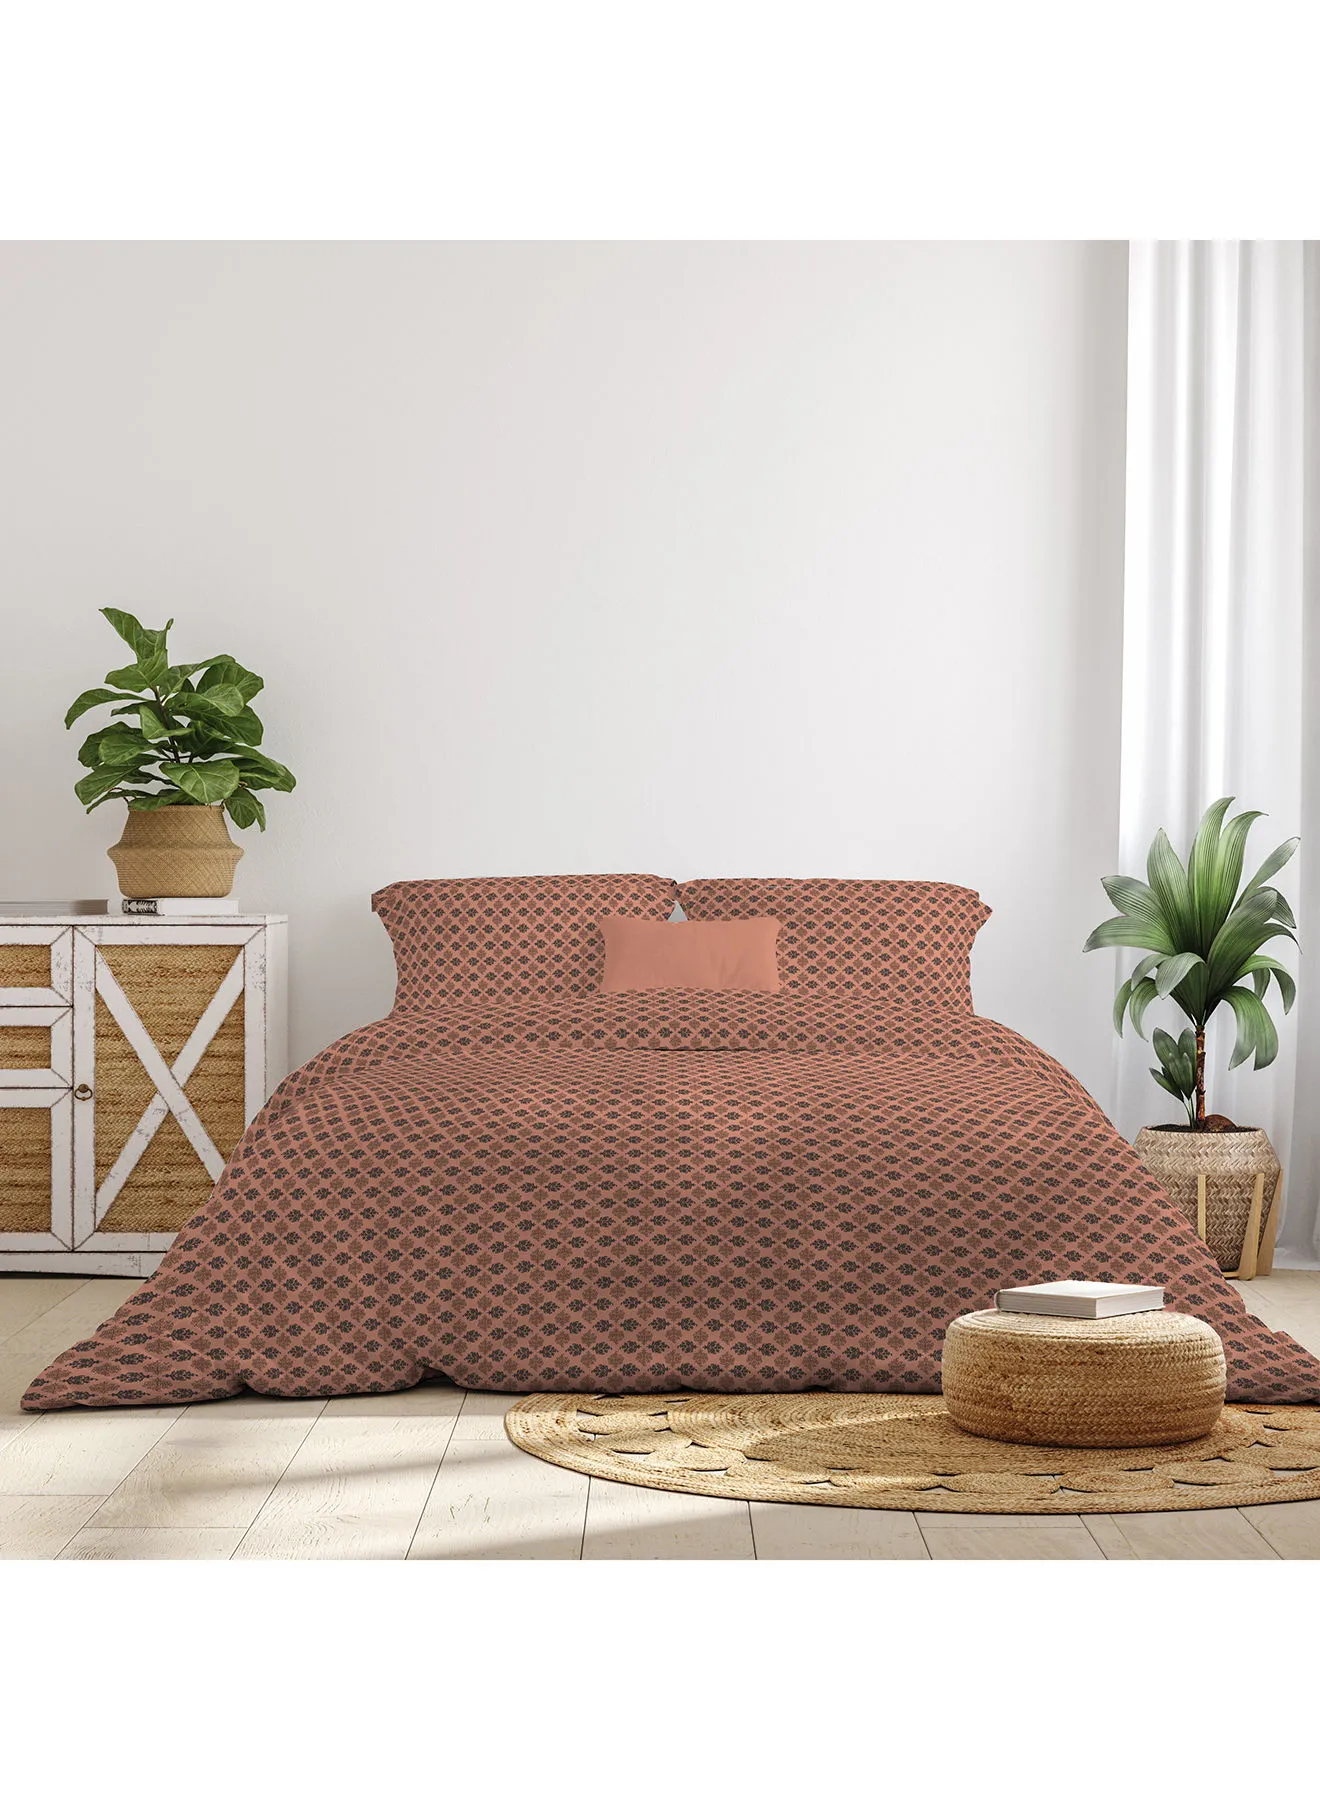 Amal Comforter Set Queen Size All Season Everyday Use Bedding Set 100% Cotton 3 Pieces 1 Comforter 2 Pillow Covers  Brown